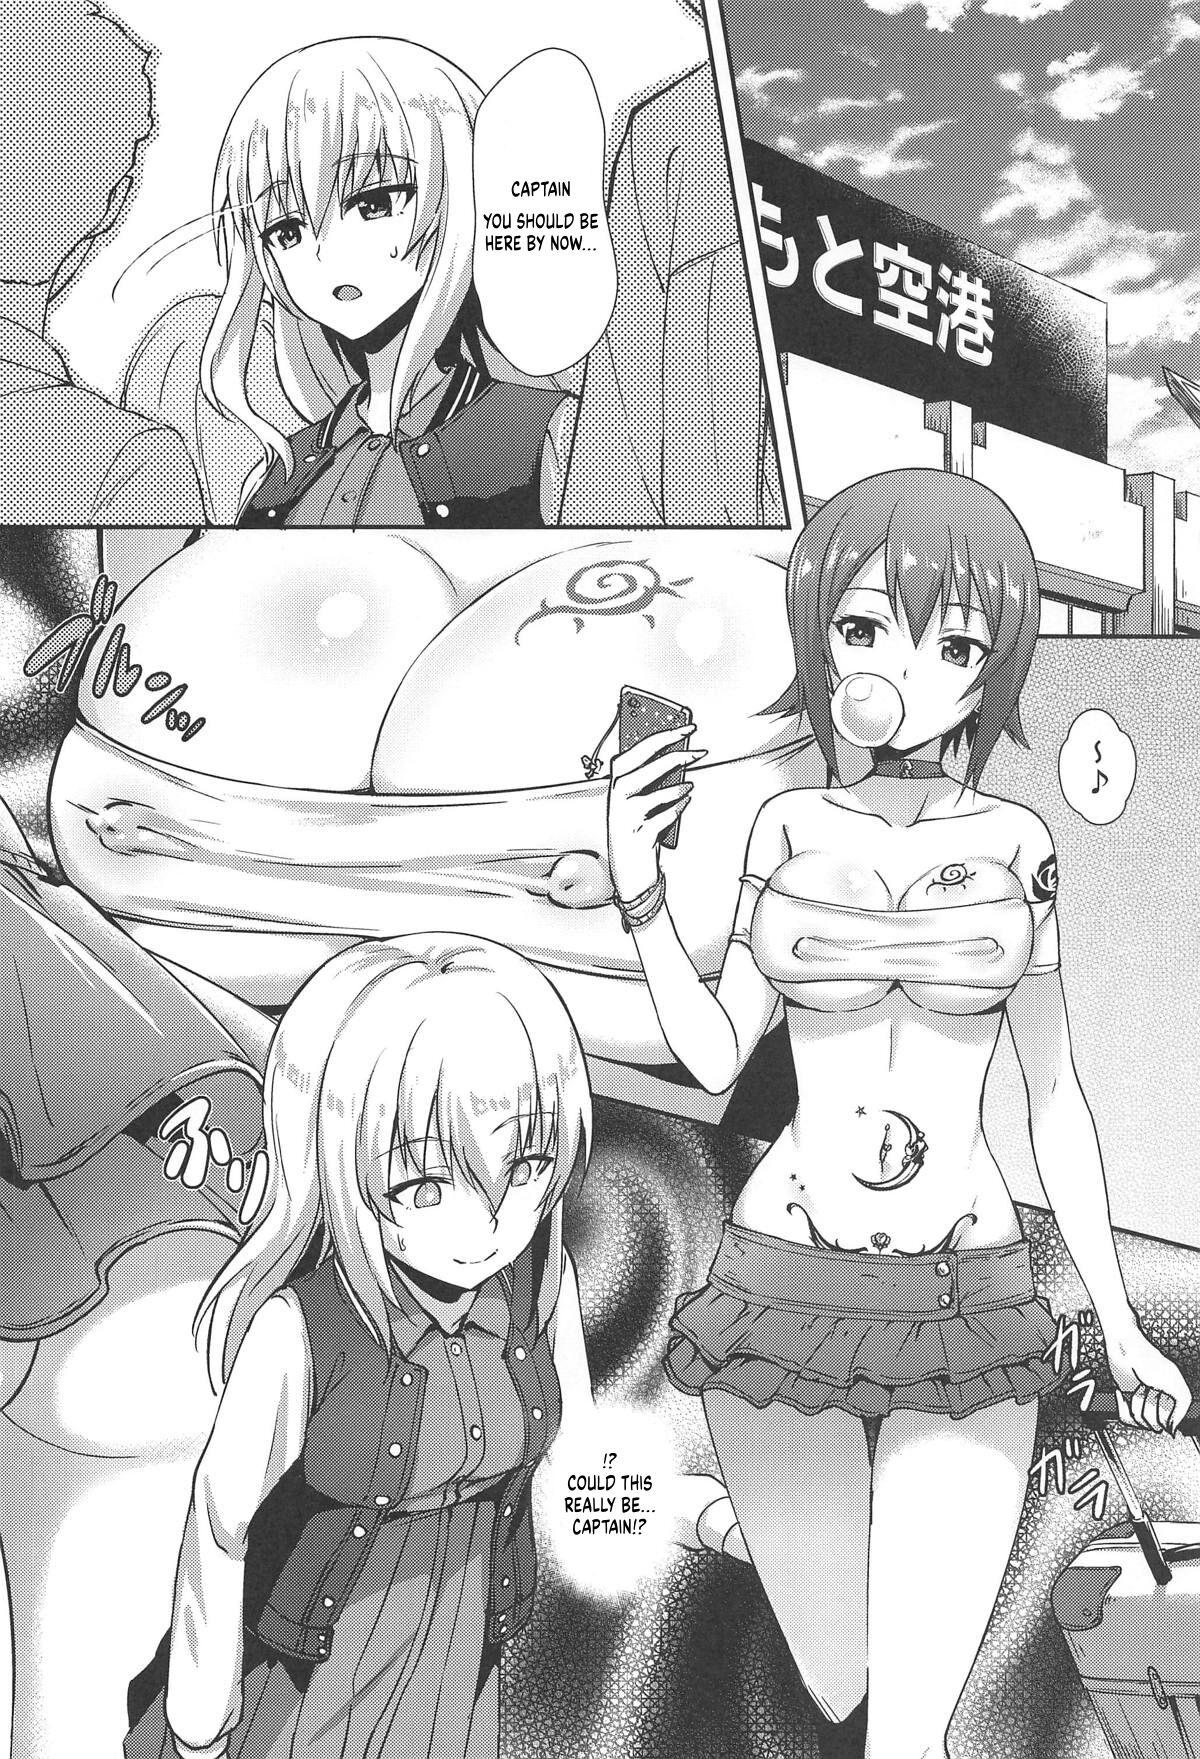 Deep Throat The Way How a Matriarch is Brought Up - Maho's Case, Bottom - Girls und panzer High Heels - Page 6